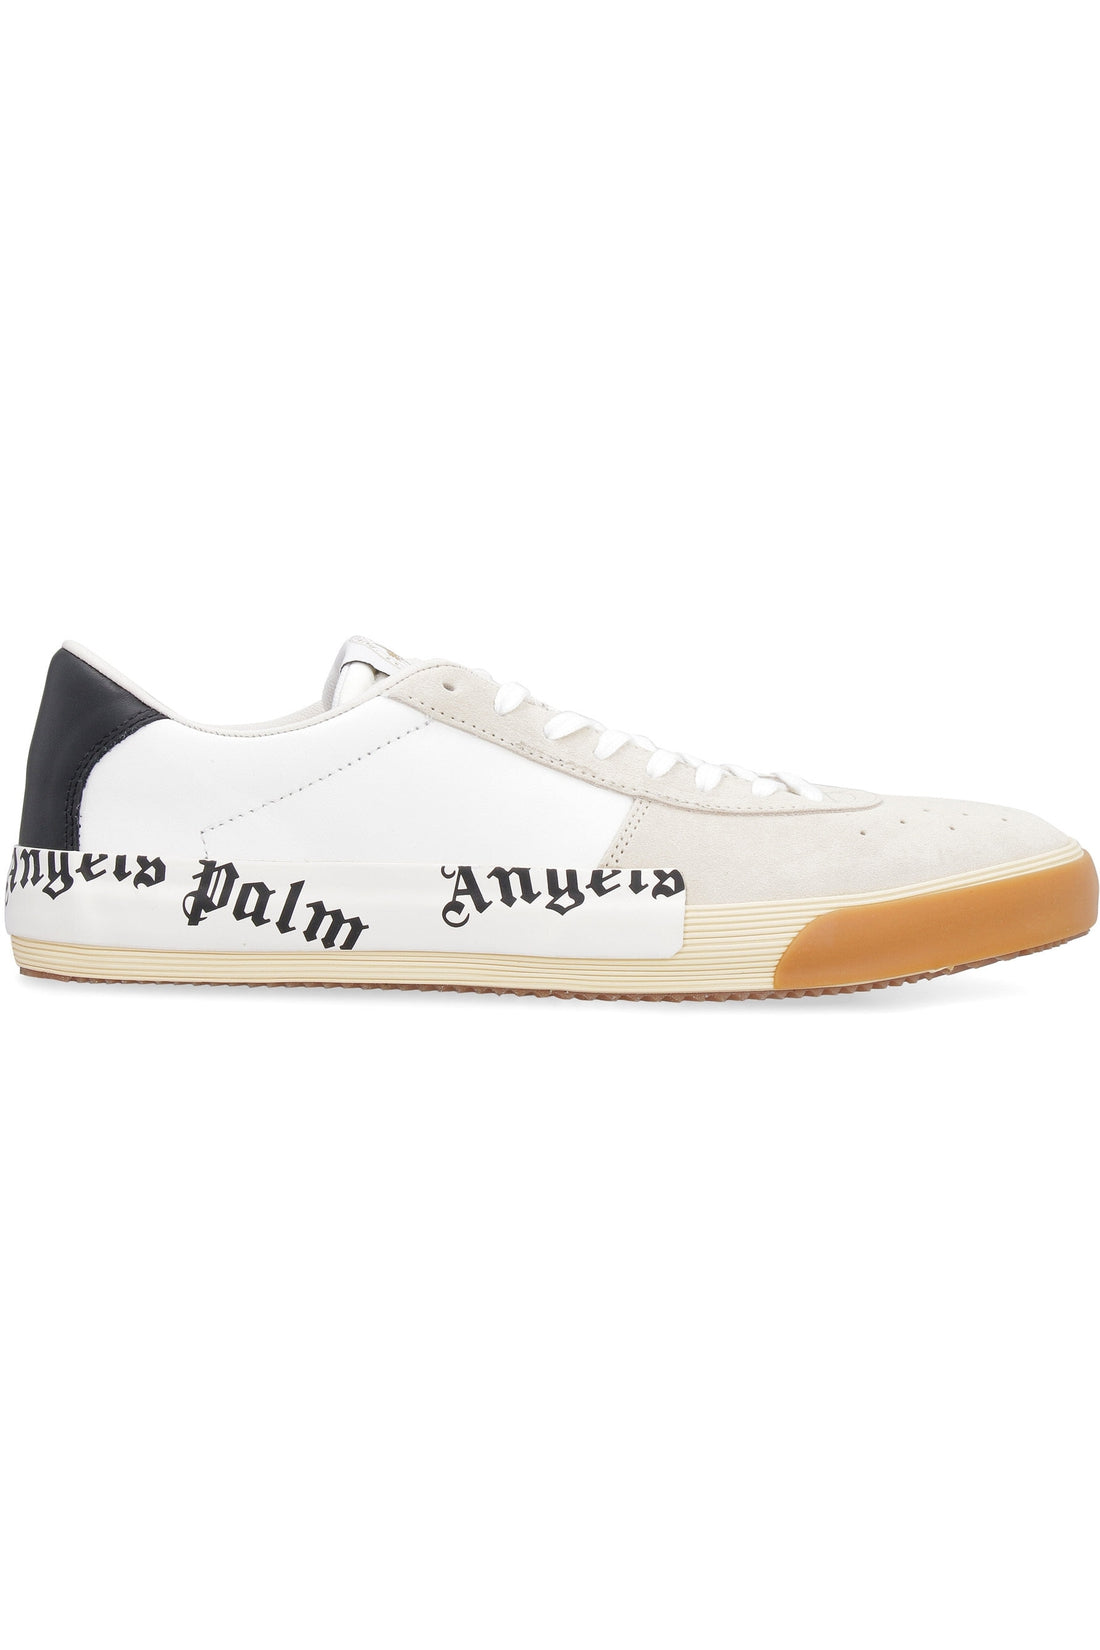 Palm Angels-OUTLET-SALE-Vulcanized low-top sneakers-ARCHIVIST